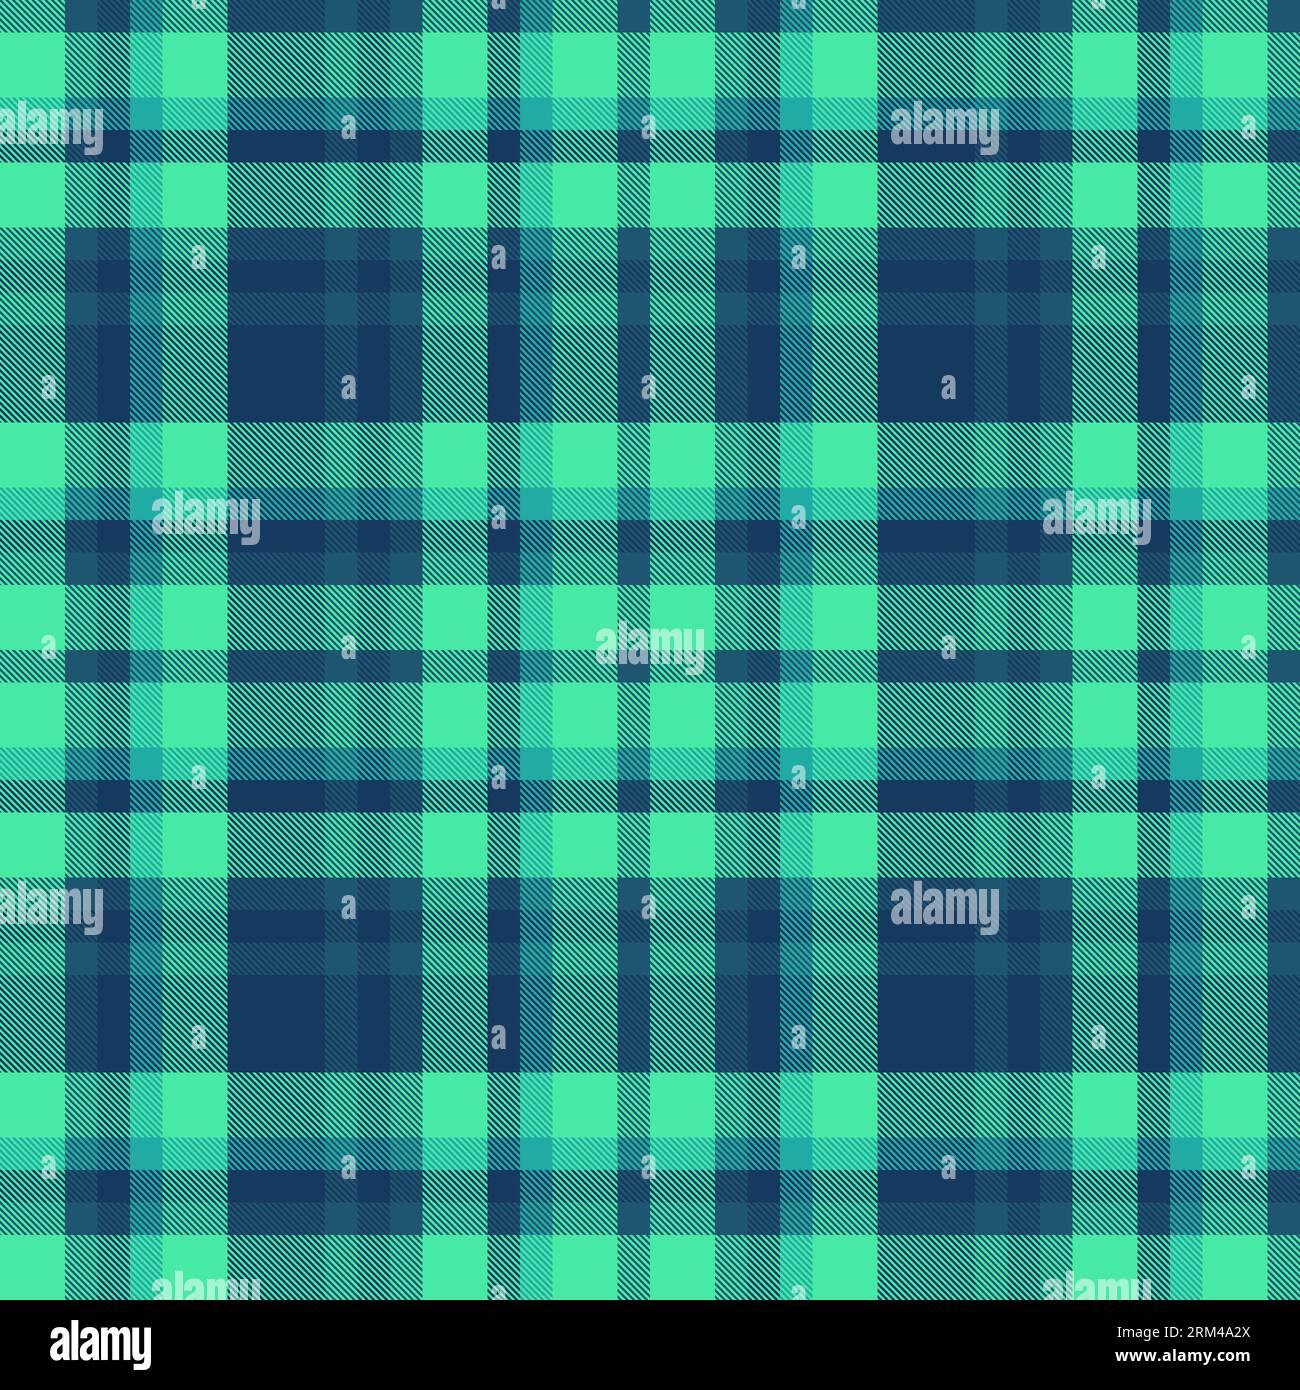 Plaid check fabric of pattern vector background with a texture textile seamless tartan in mint and blue colors. Stock Vector